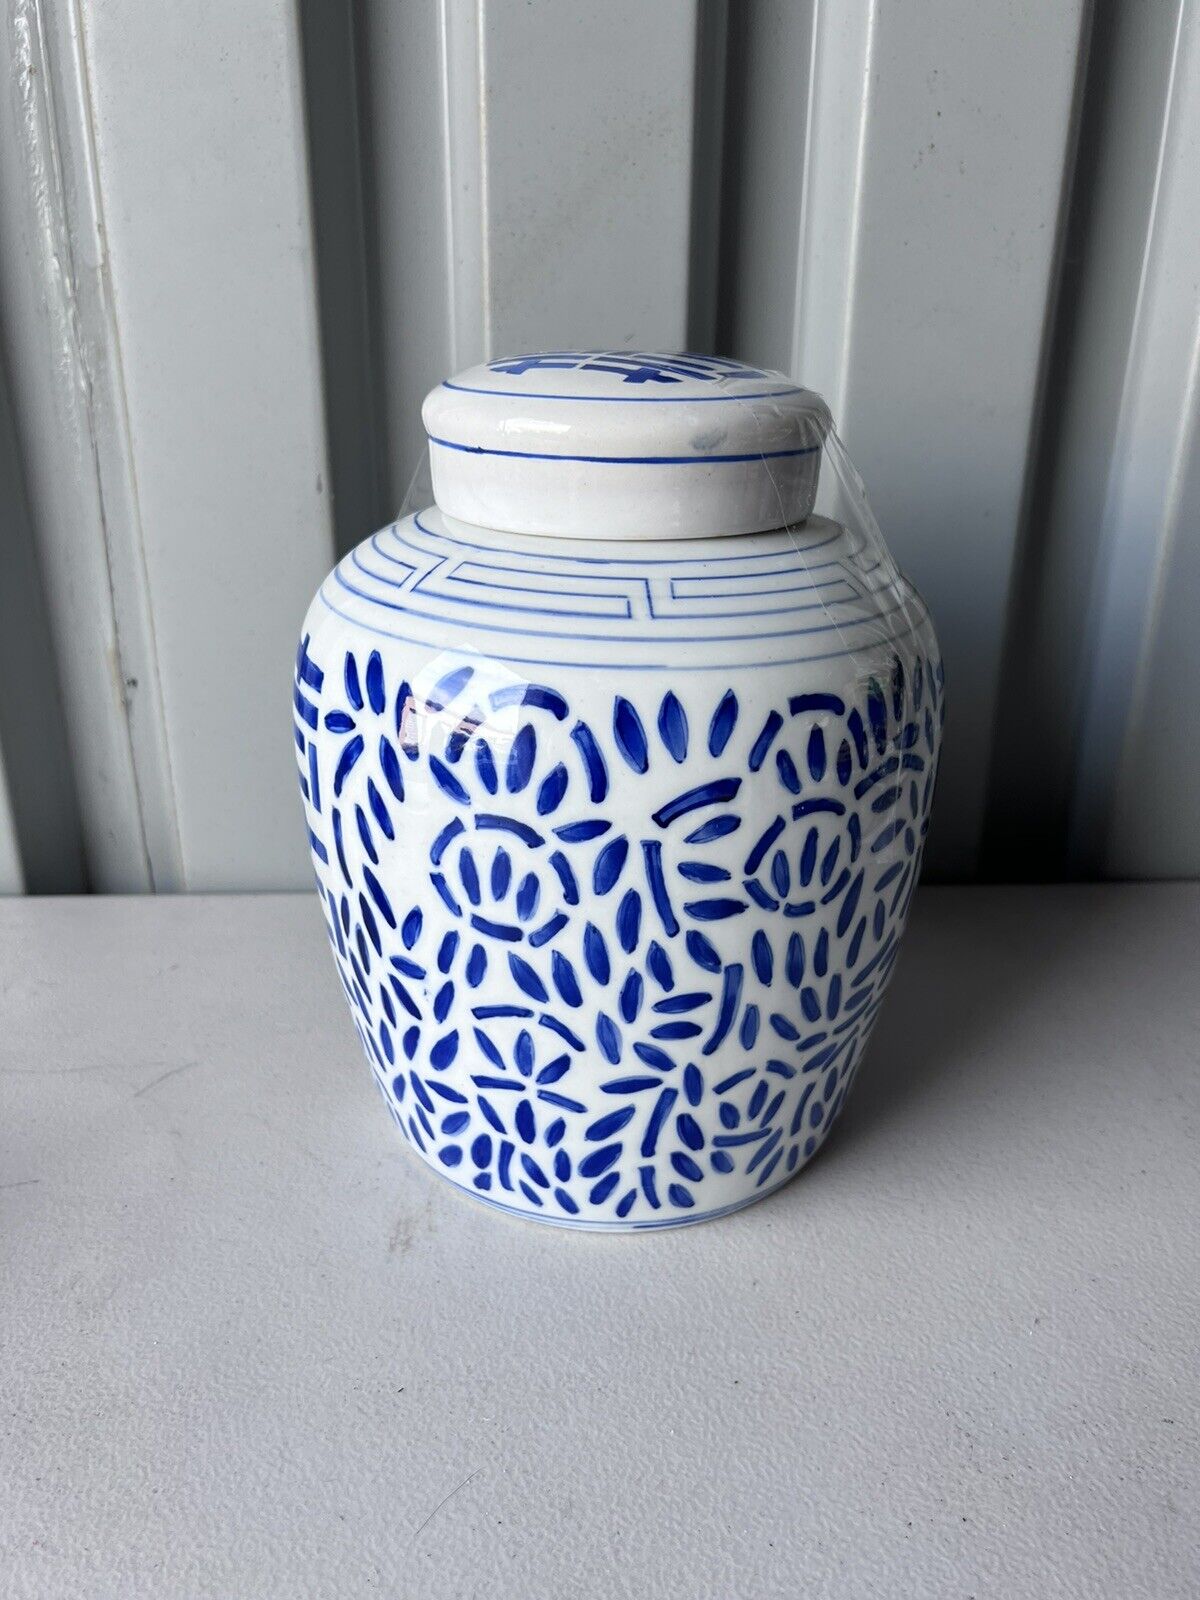 Vintage Double Happiness Chinese Ginger Jar blue and white Porcelain chinoiserie